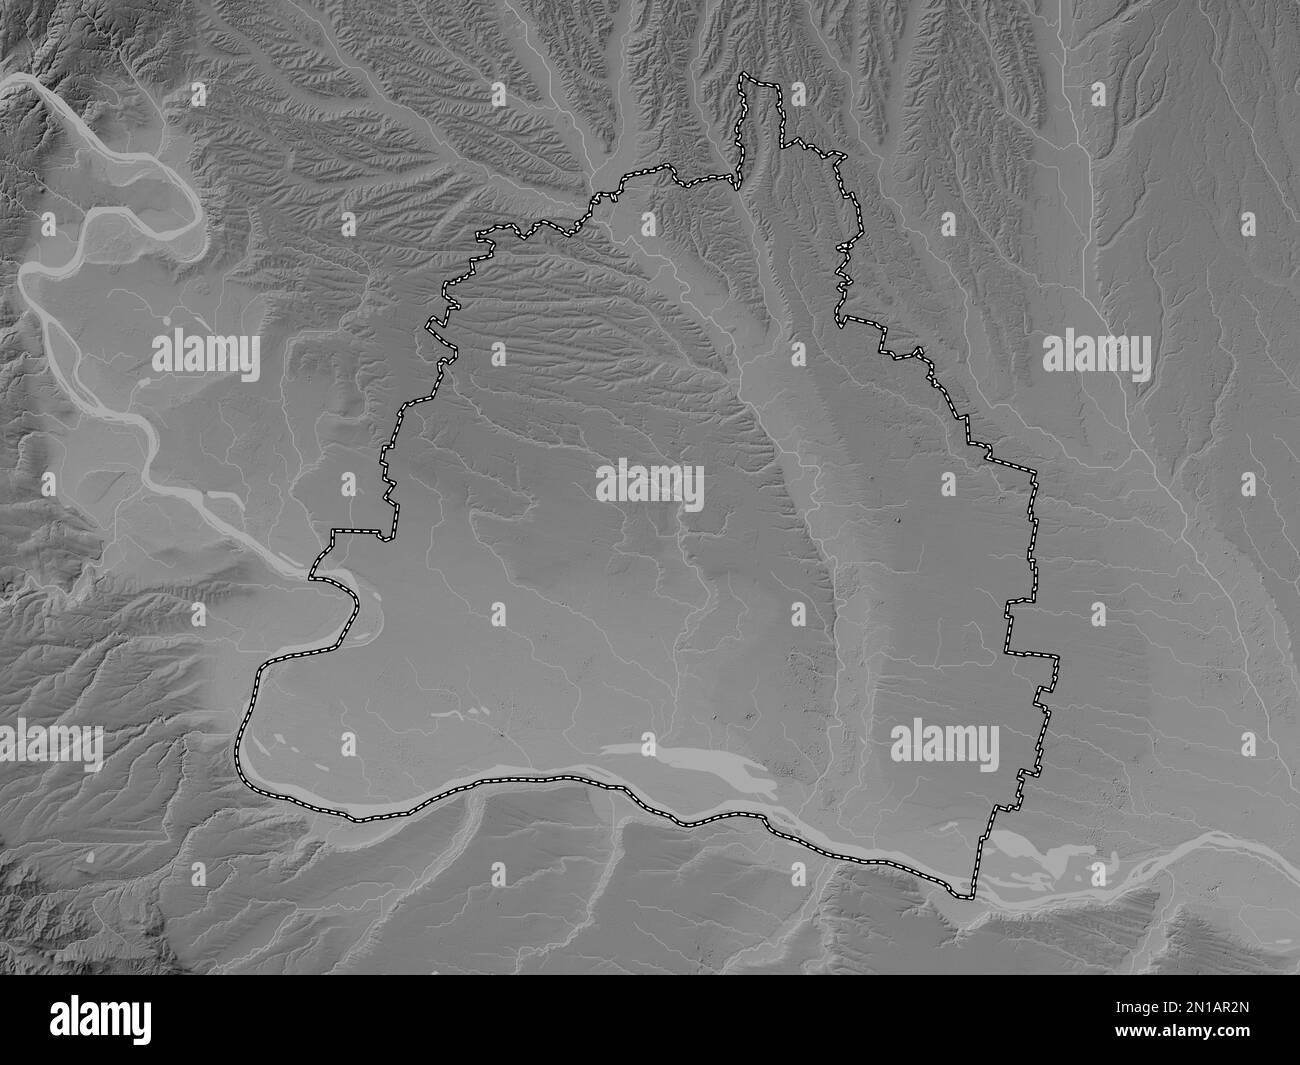 Dolj, county of Romania. Grayscale elevation map with lakes and rivers Stock Photo